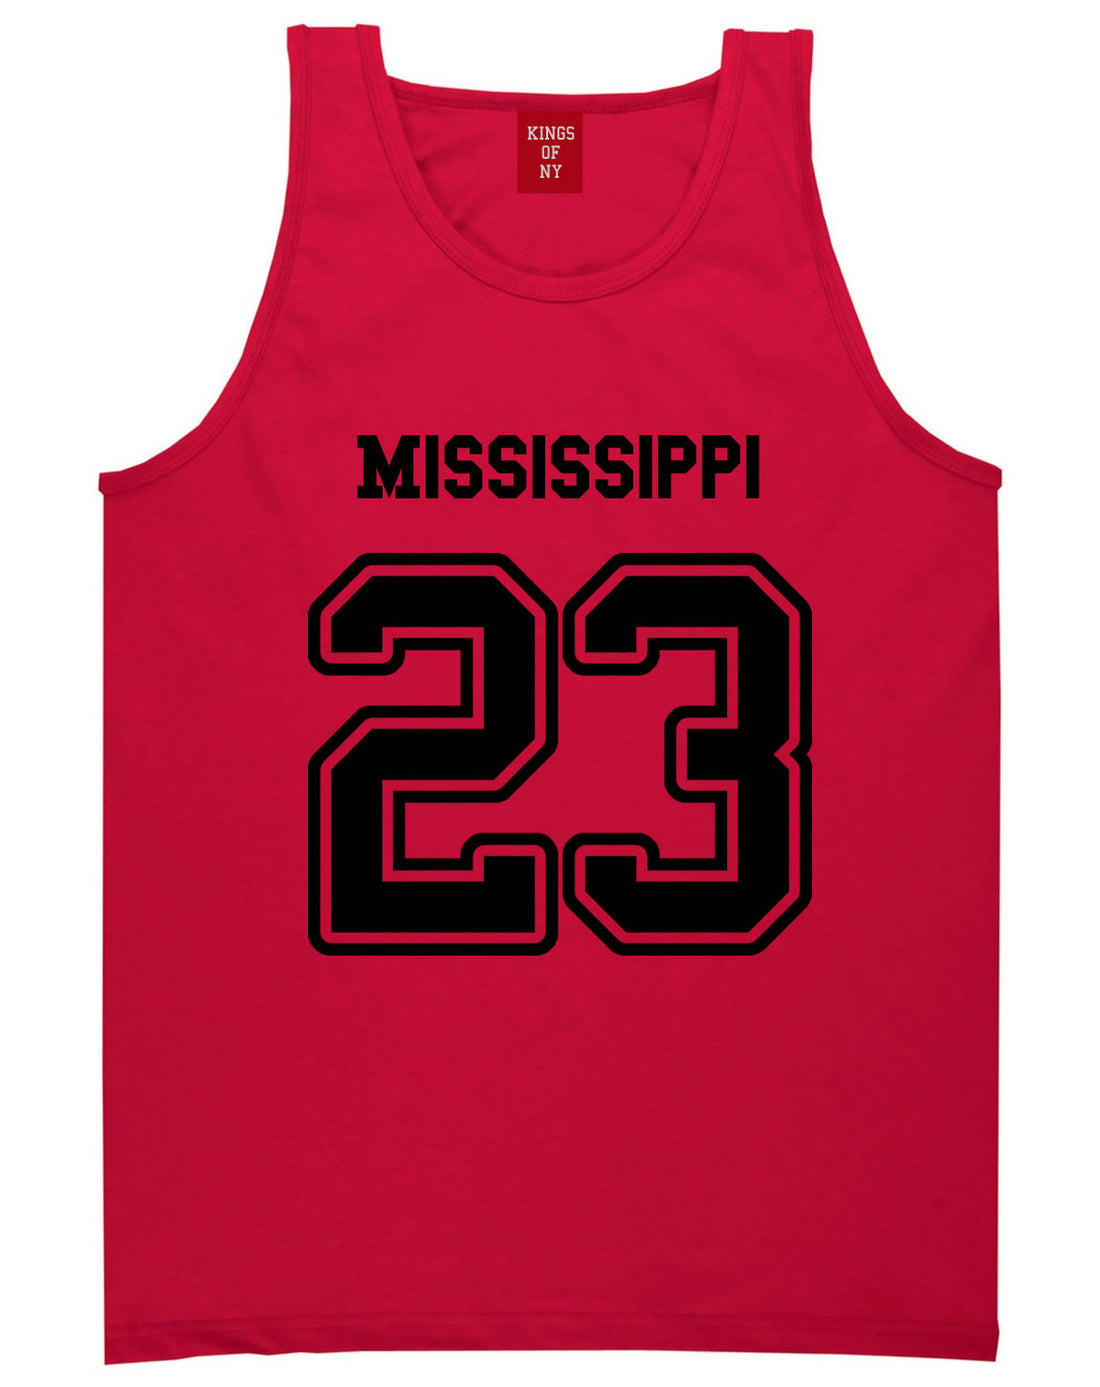 Sport Style Mississippi 23 Team State Jersey Mens Tank Top By Kings Of NY